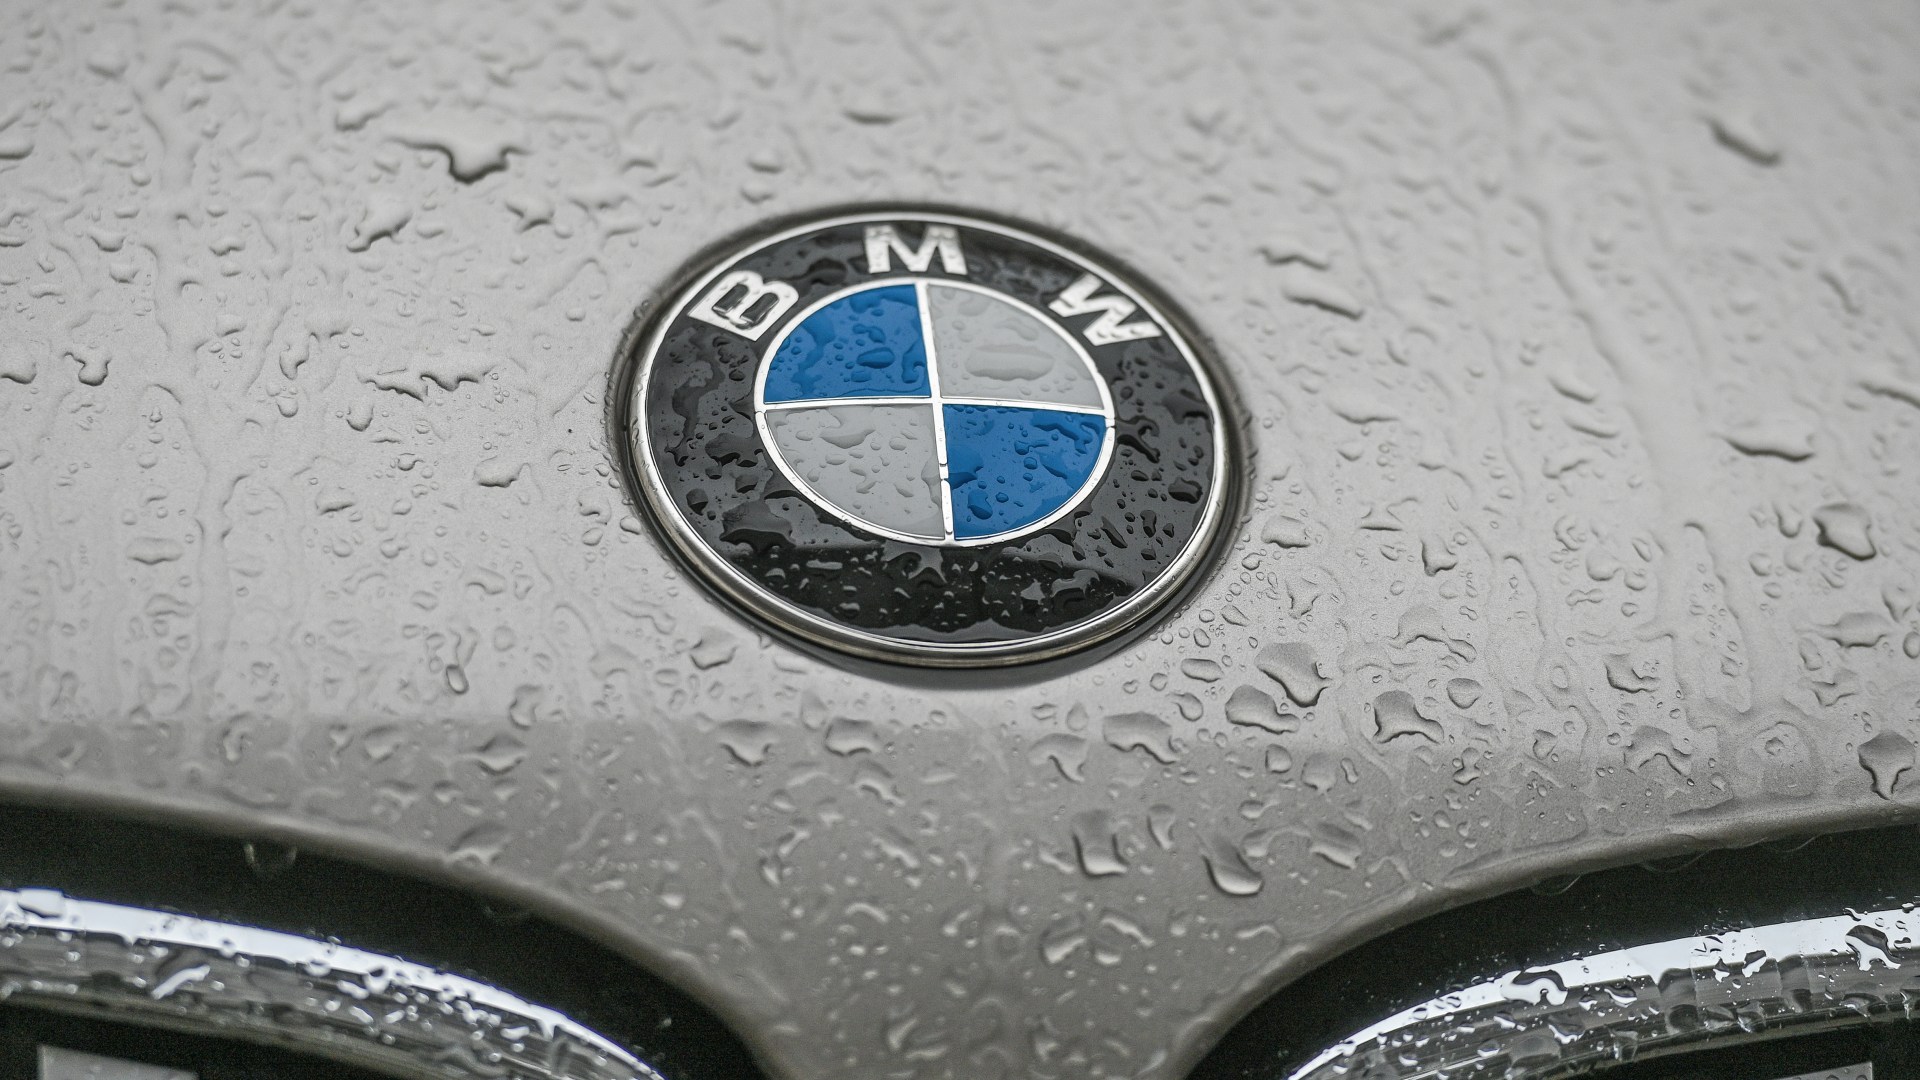 Drivers are just realising the historical hidden meaning behind BMW’s iconic logo [Video]